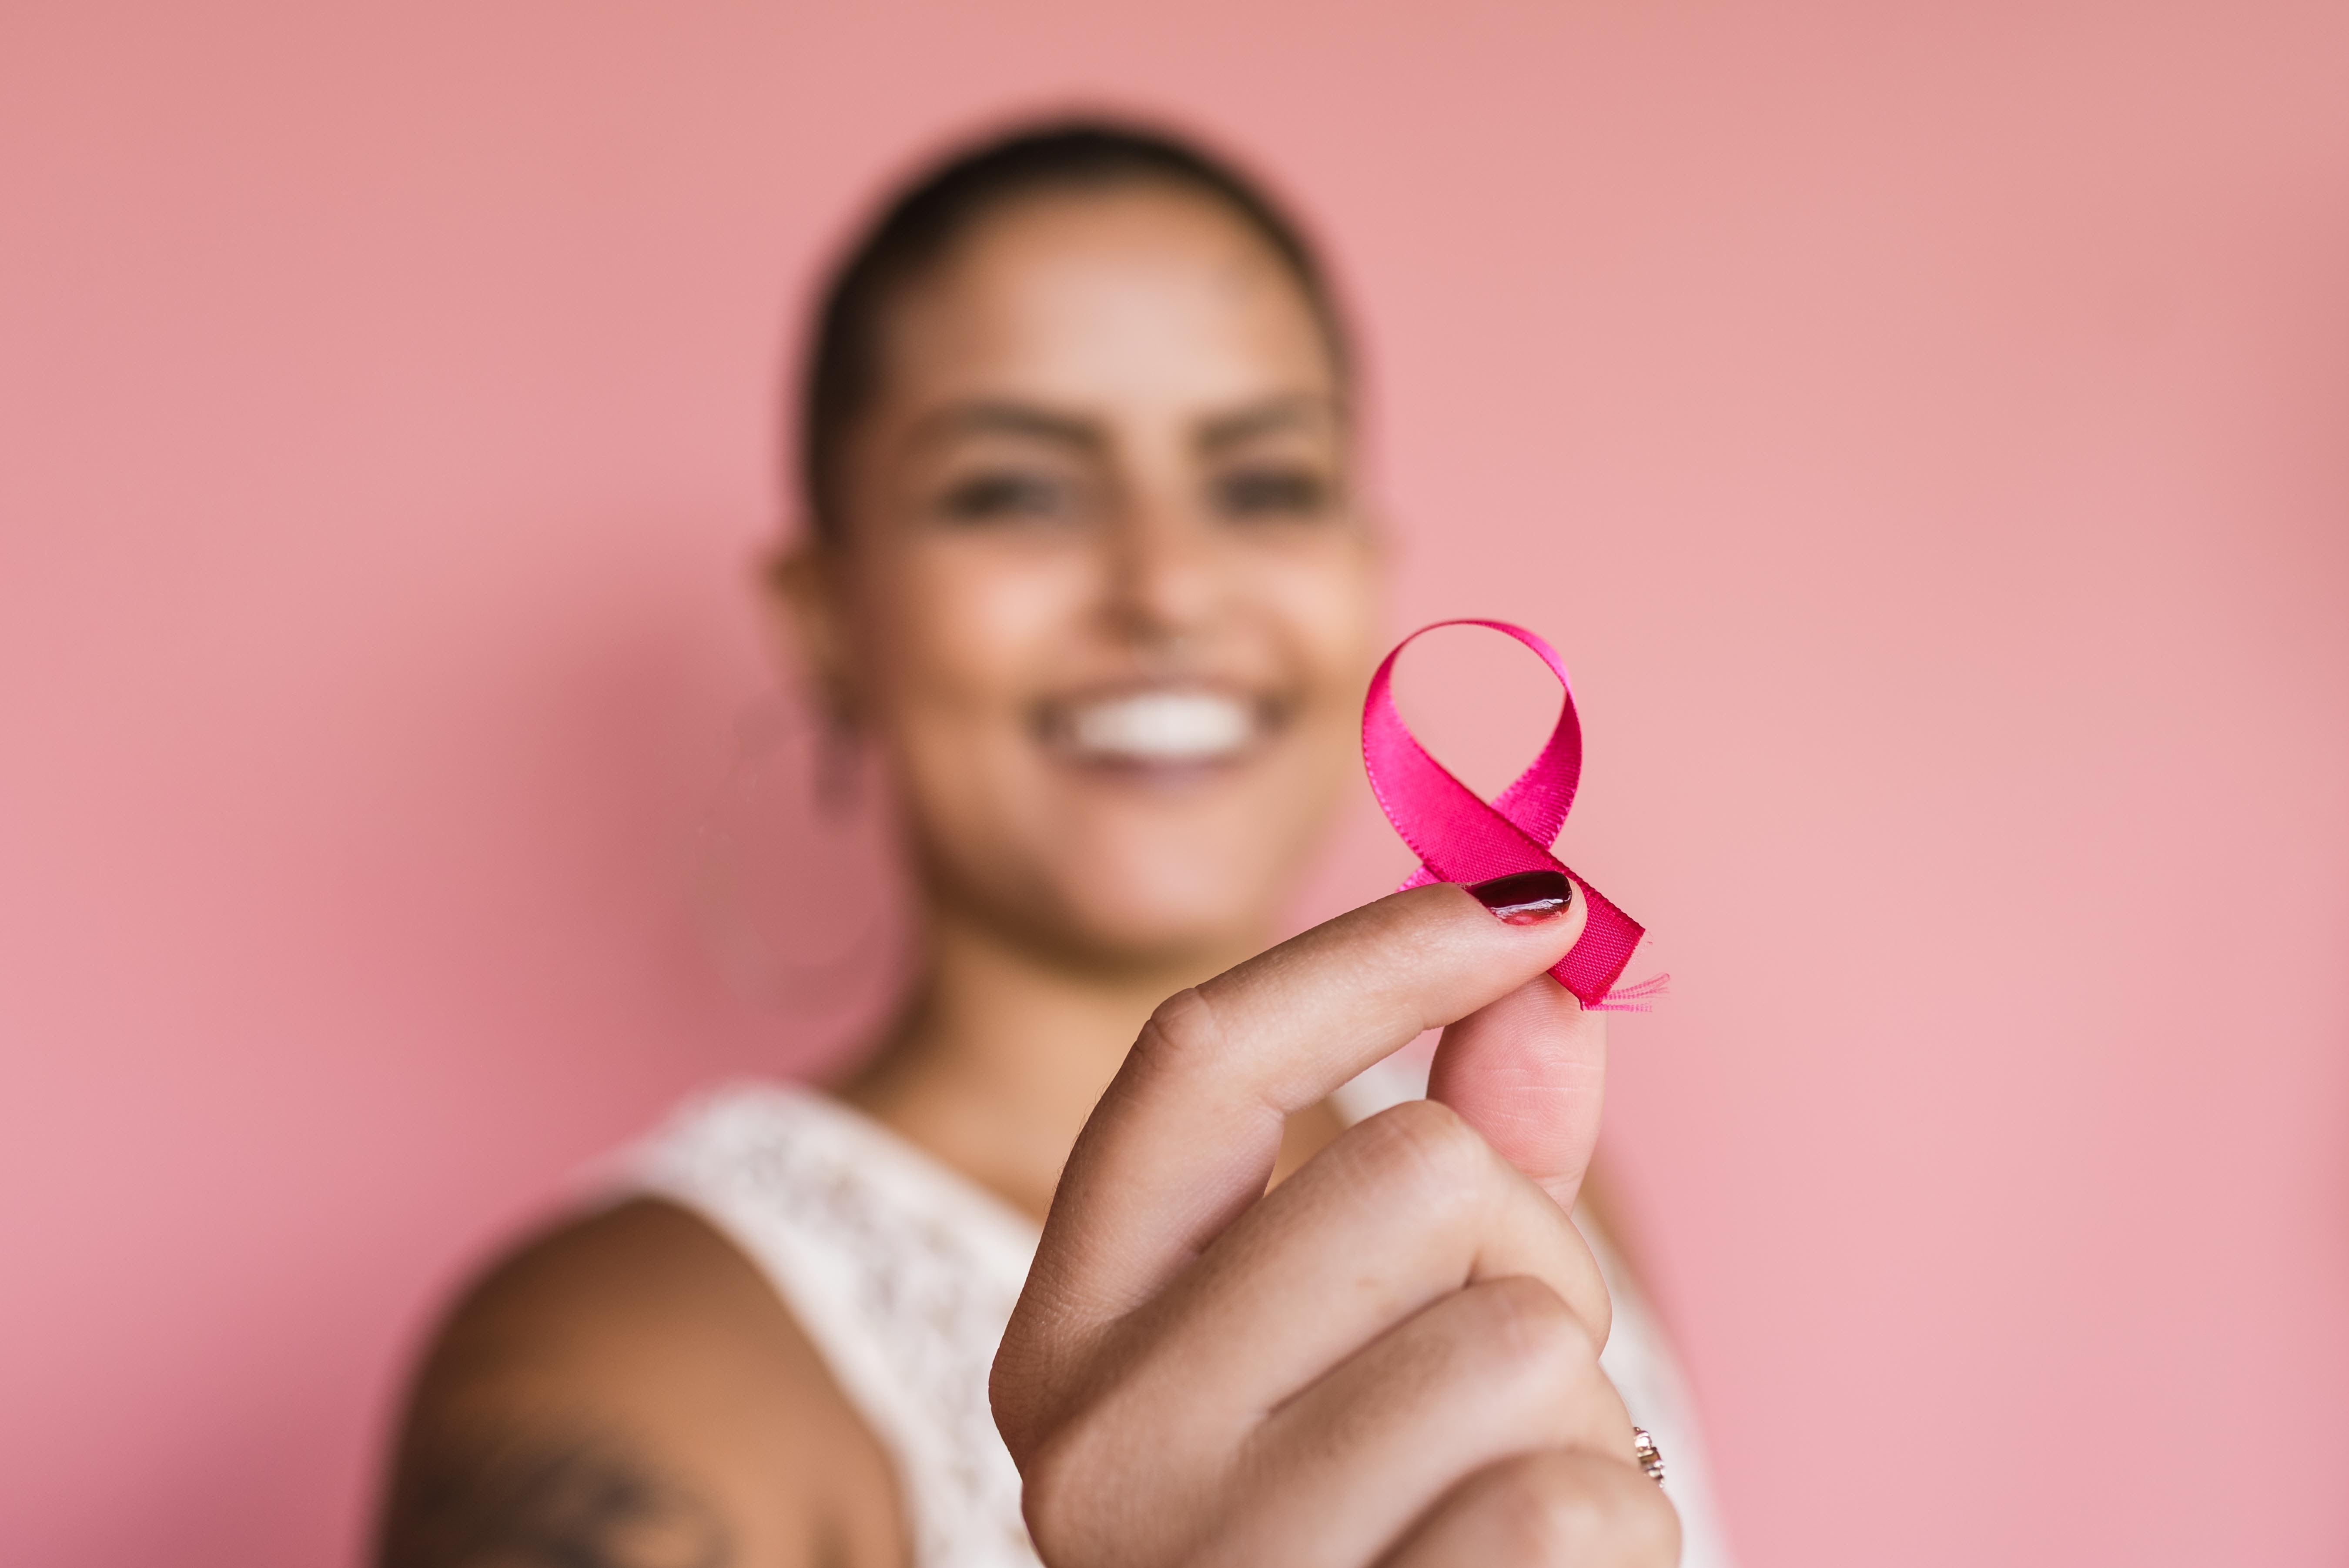 Breast cancer can impact your sex life: What to know about changes, side effects and embracing your body